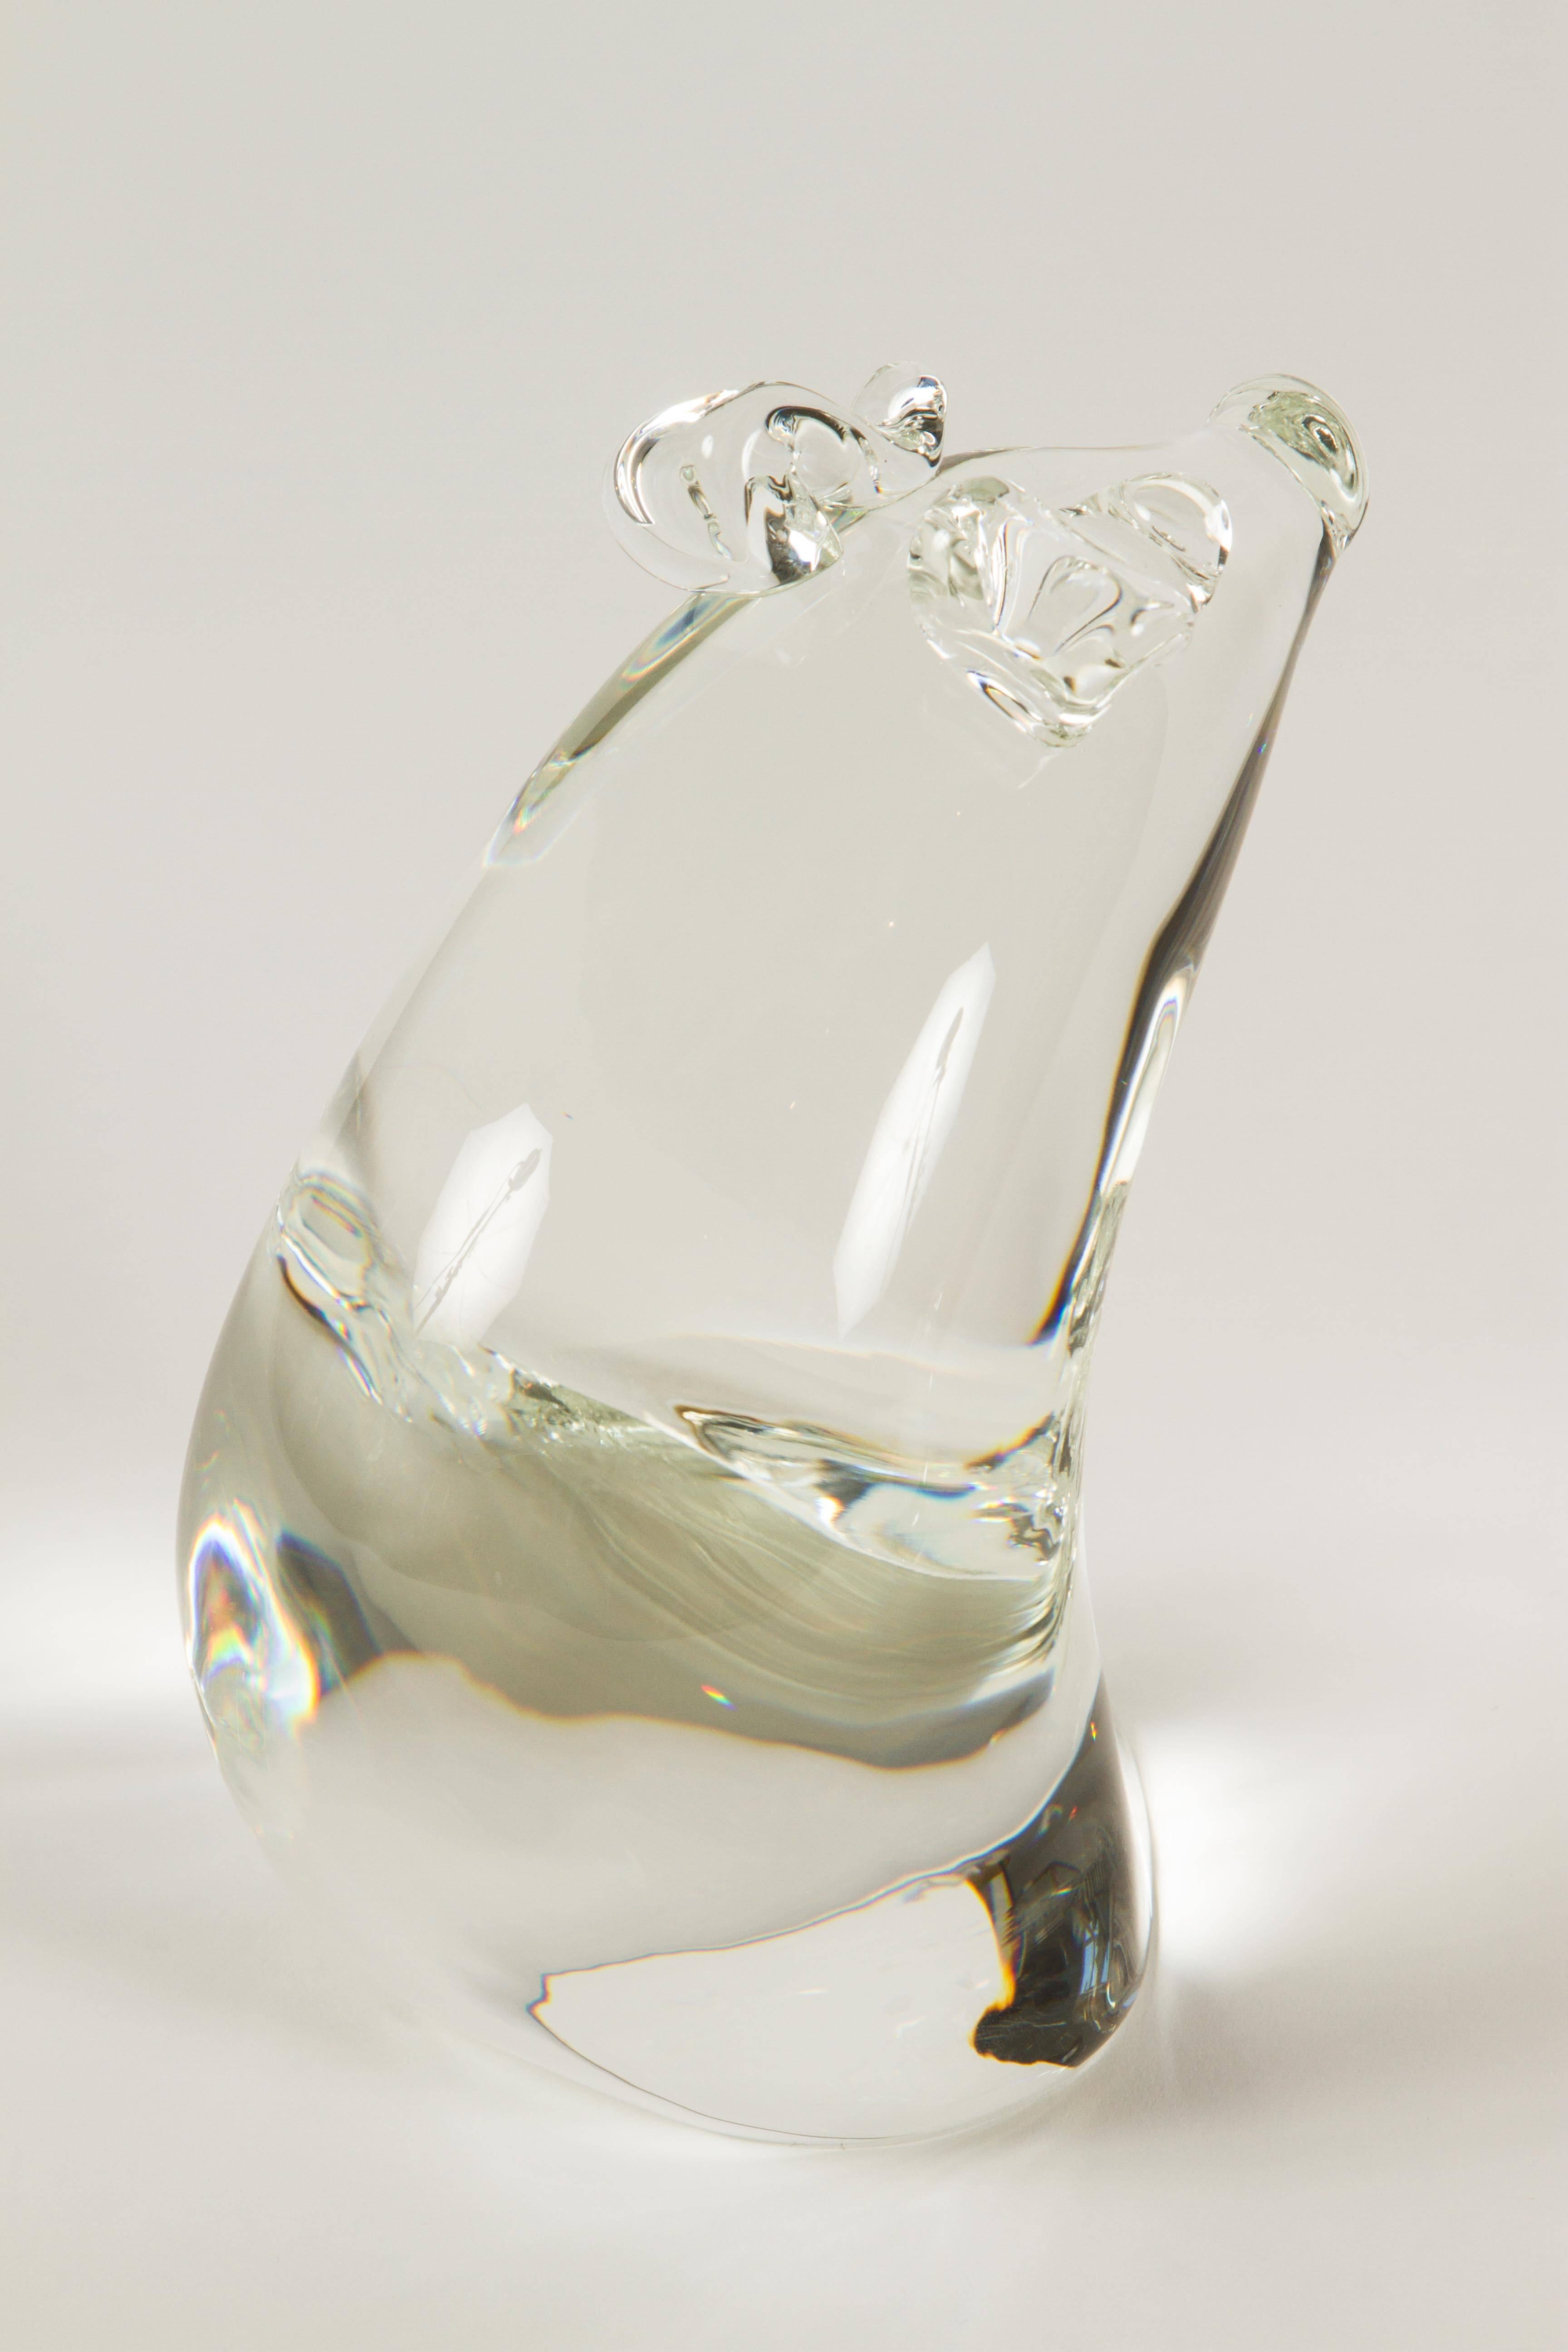 Crystal Momma Pig and Baby Pig by Lloyd Atkins for Steuben Glass